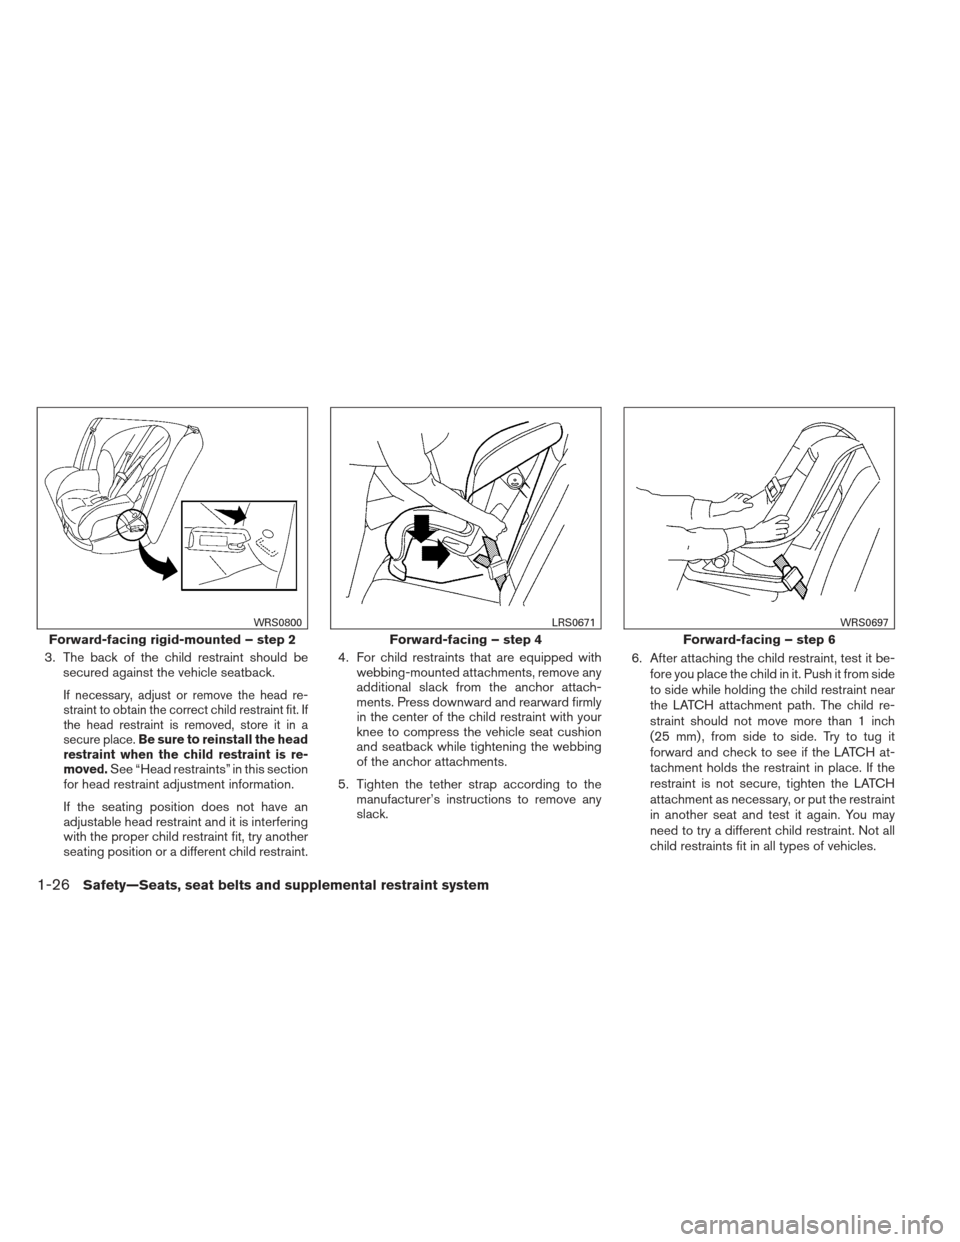 NISSAN SENTRA 2013 B17 / 7.G Service Manual 3. The back of the child restraint should besecured against the vehicle seatback.
If necessary, adjust or remove the head re-
straint to obtain the correct child restraint fit. If
the head restraint i